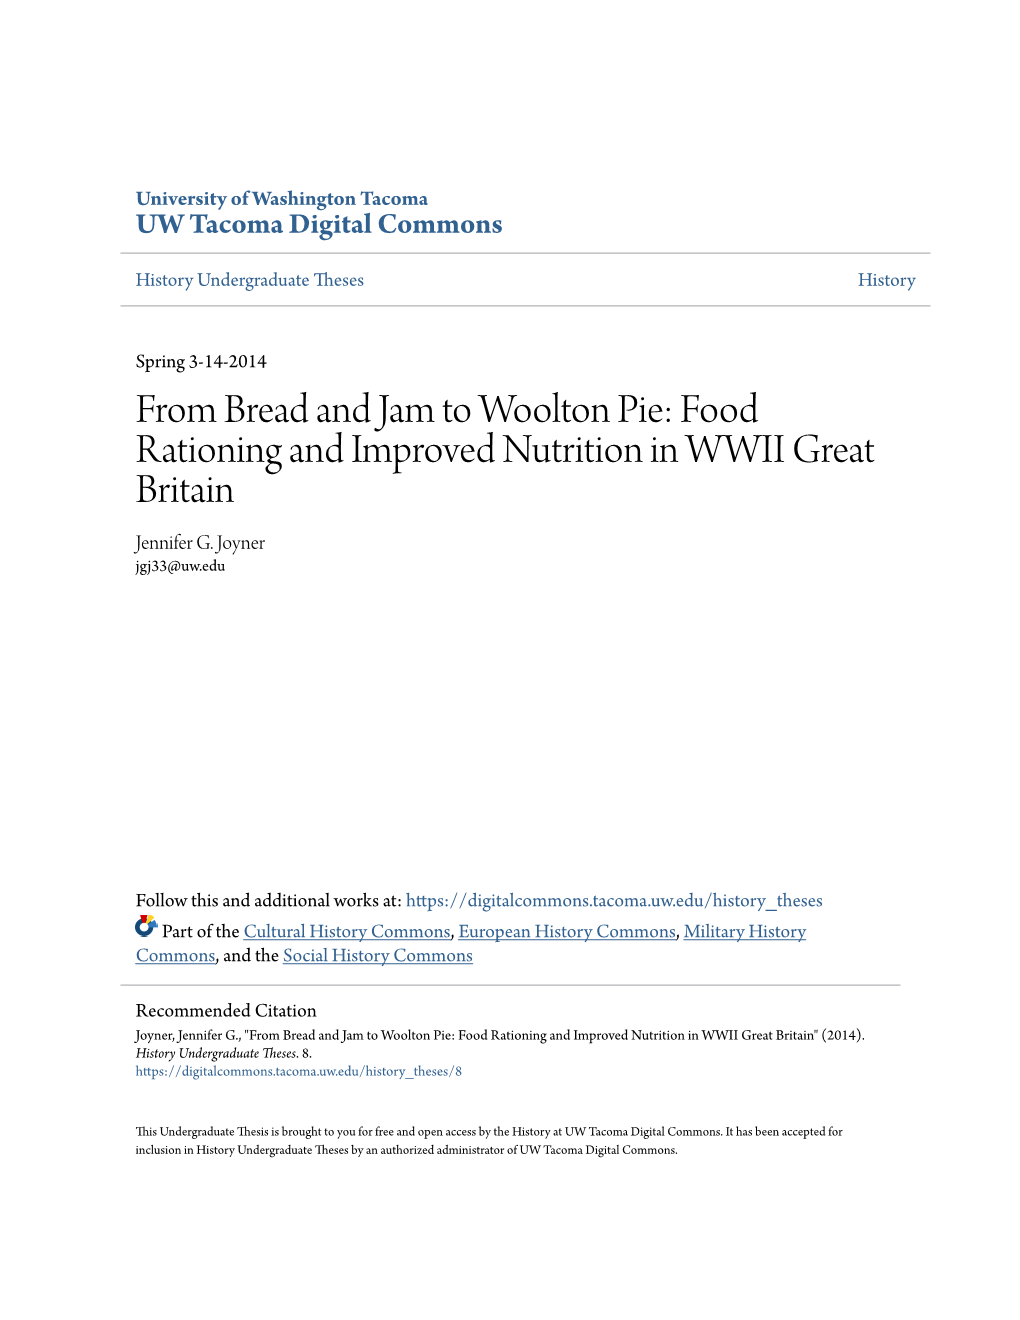 Food Rationing and Improved Nutrition in WWII Great Britain Jennifer G